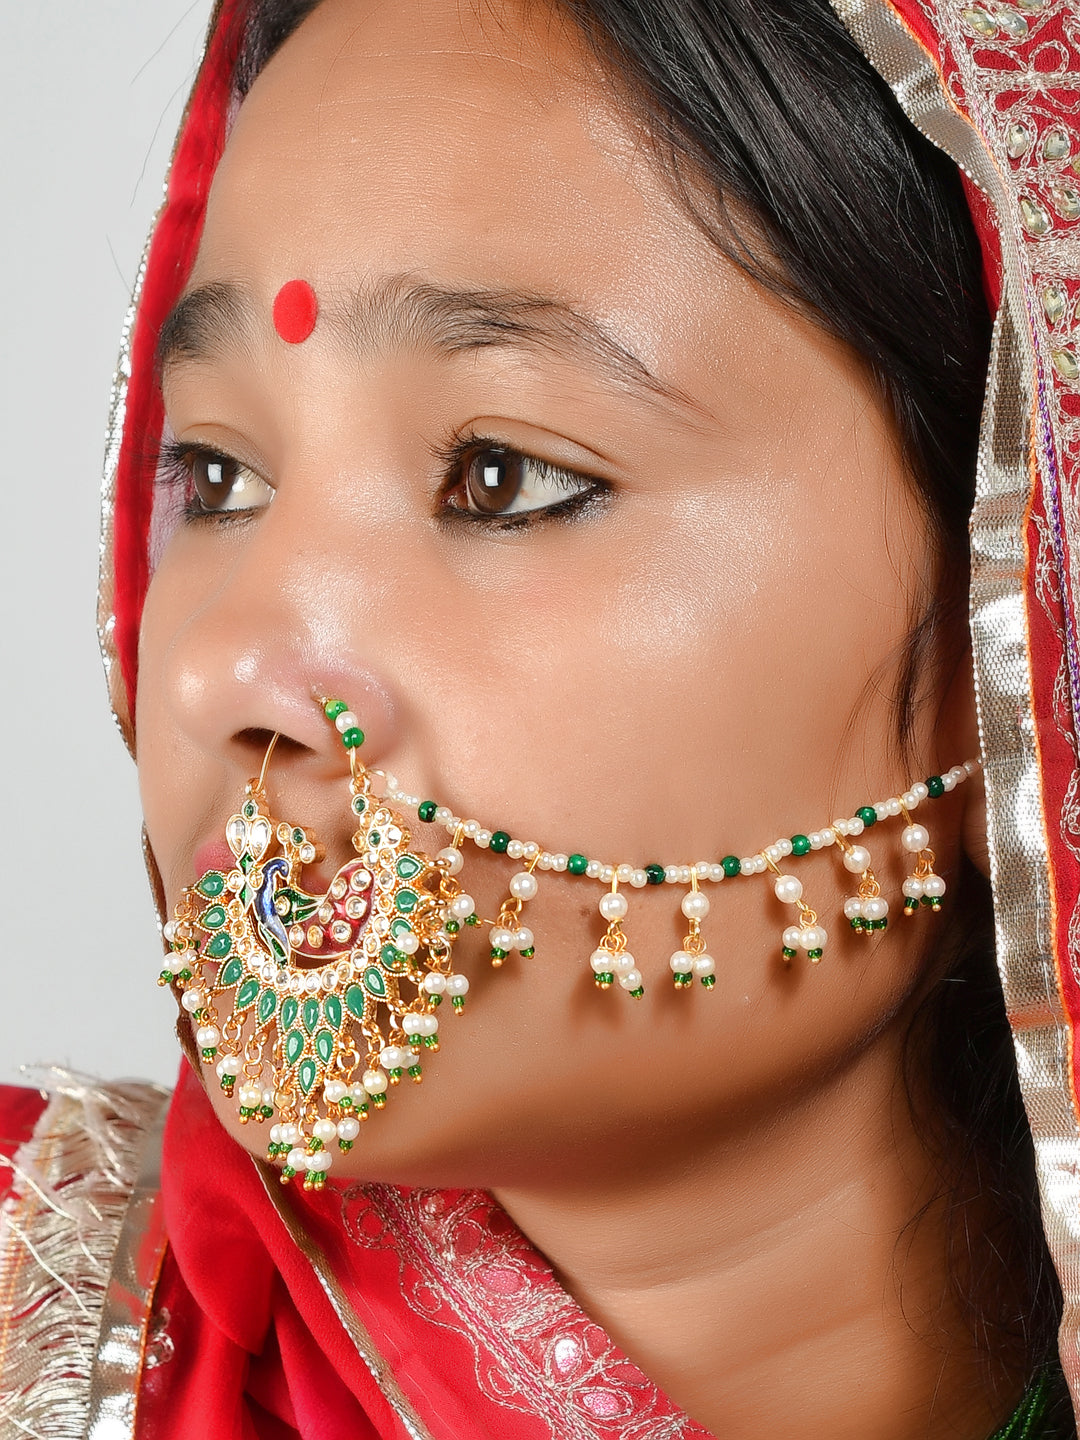 The History and Legacy of Nose Piercings in India